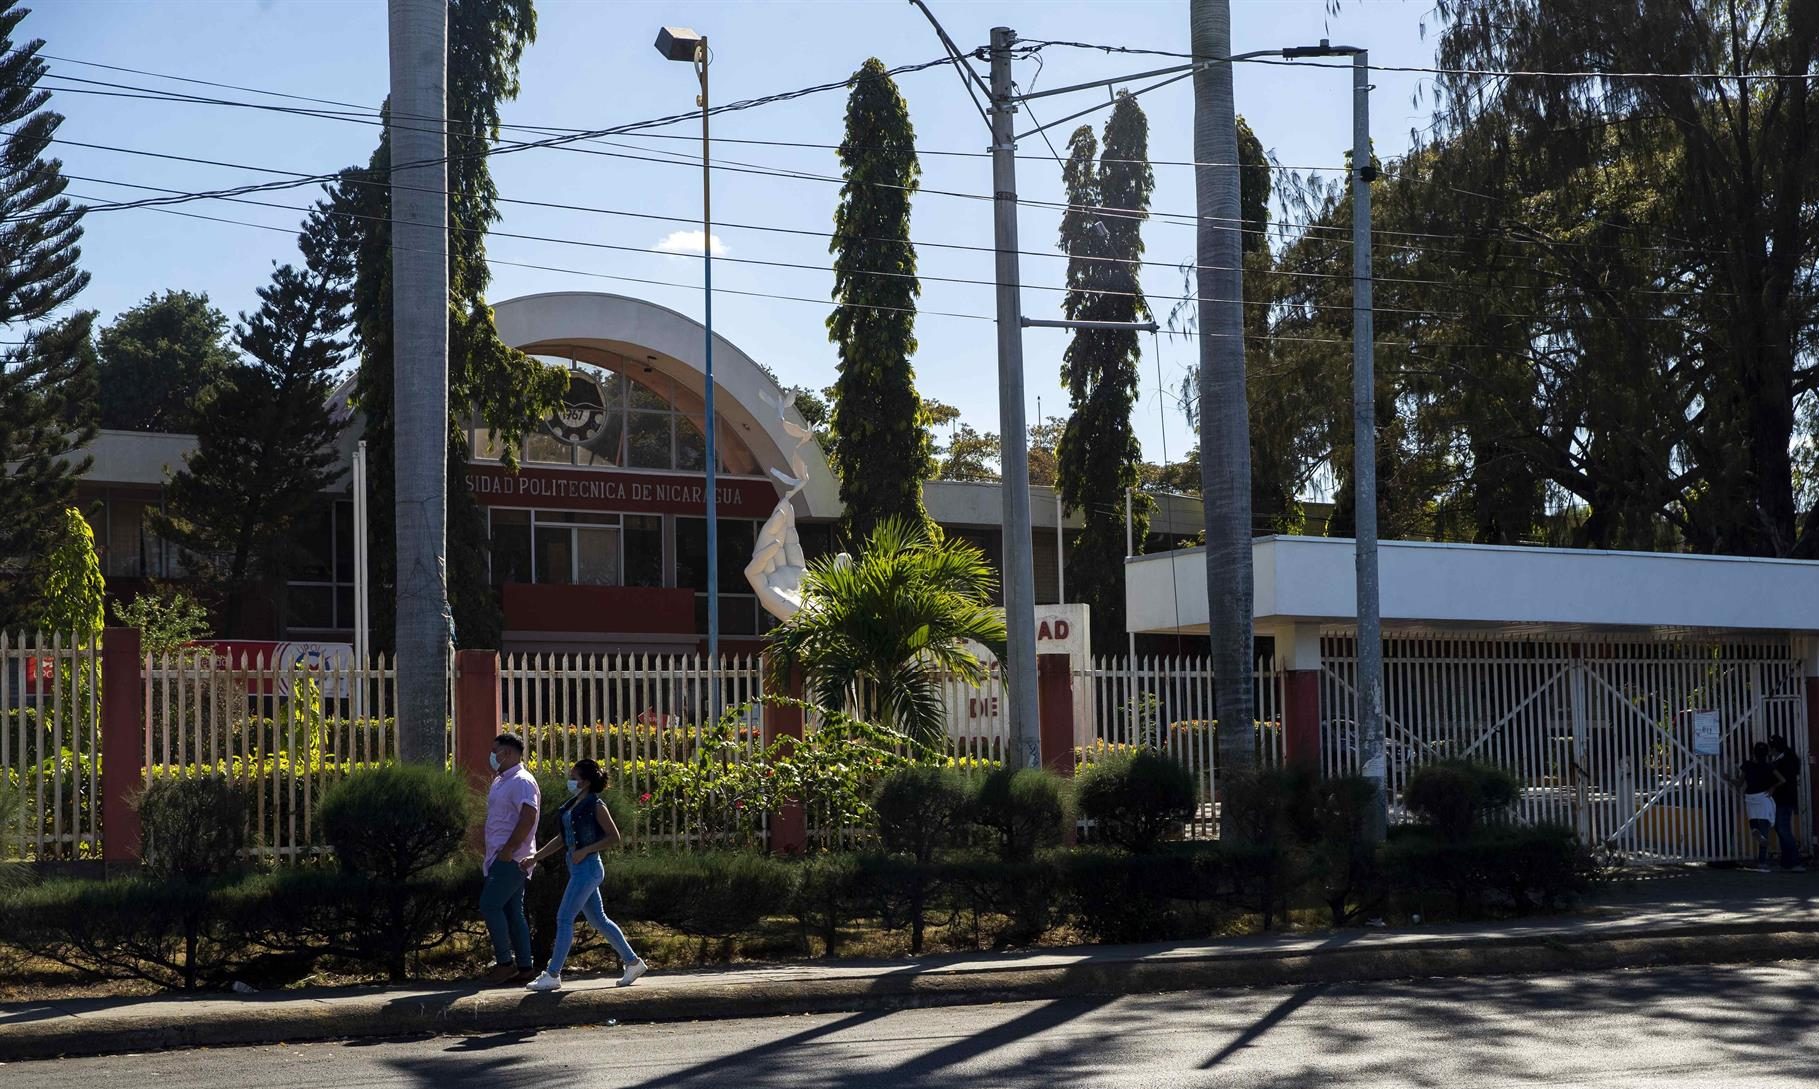 Nicaragua suffers a serious setback in academic freedom and university autonomy